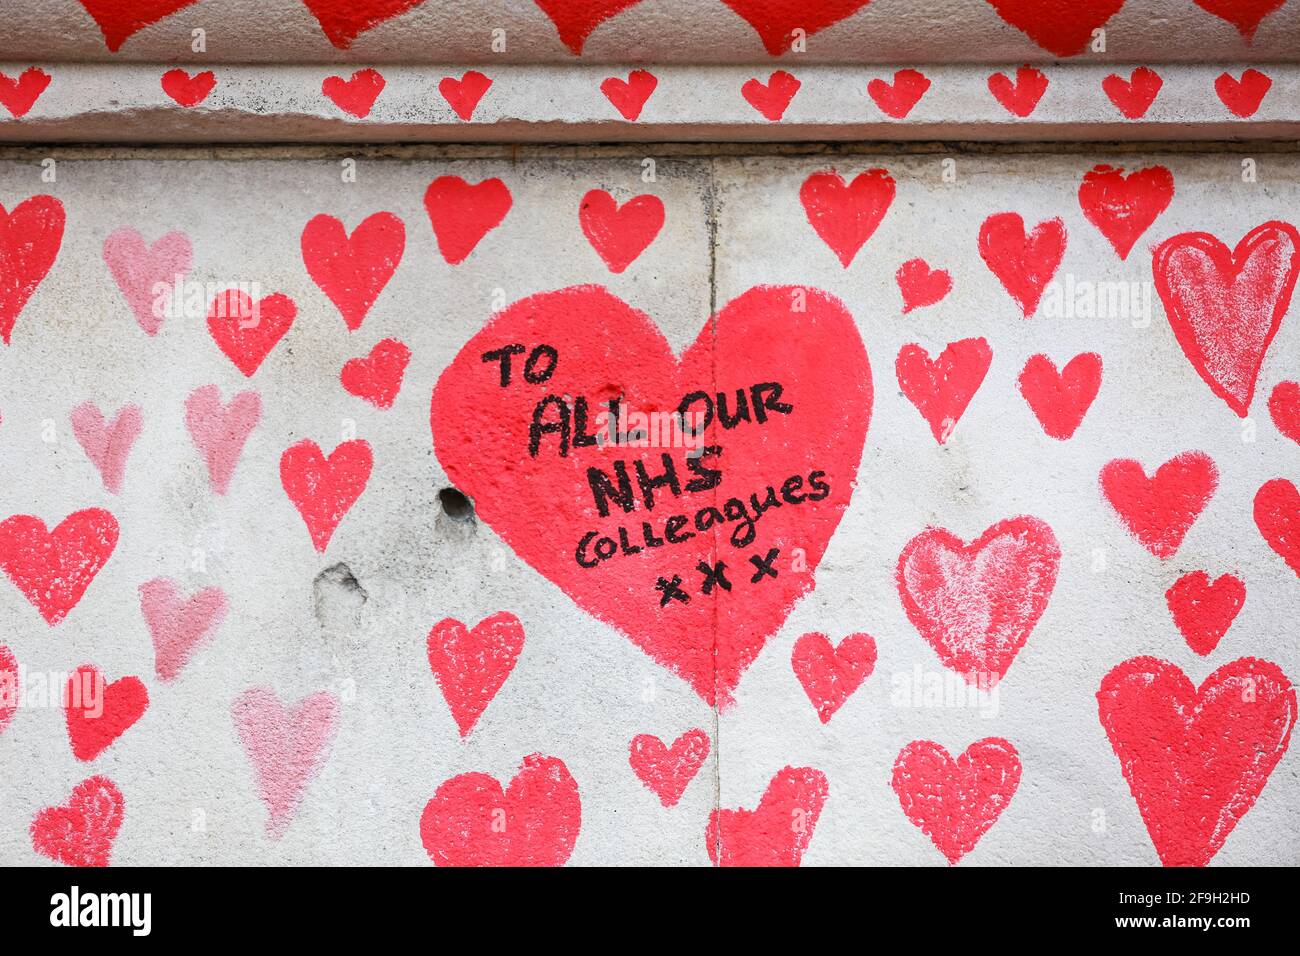 London, UK. 13 April 2021. The National COVID Memorial Wall - hand drawn red hearts on a wall opposite Houses of Parliament. Credit: Waldemar Sikora Stock Photo